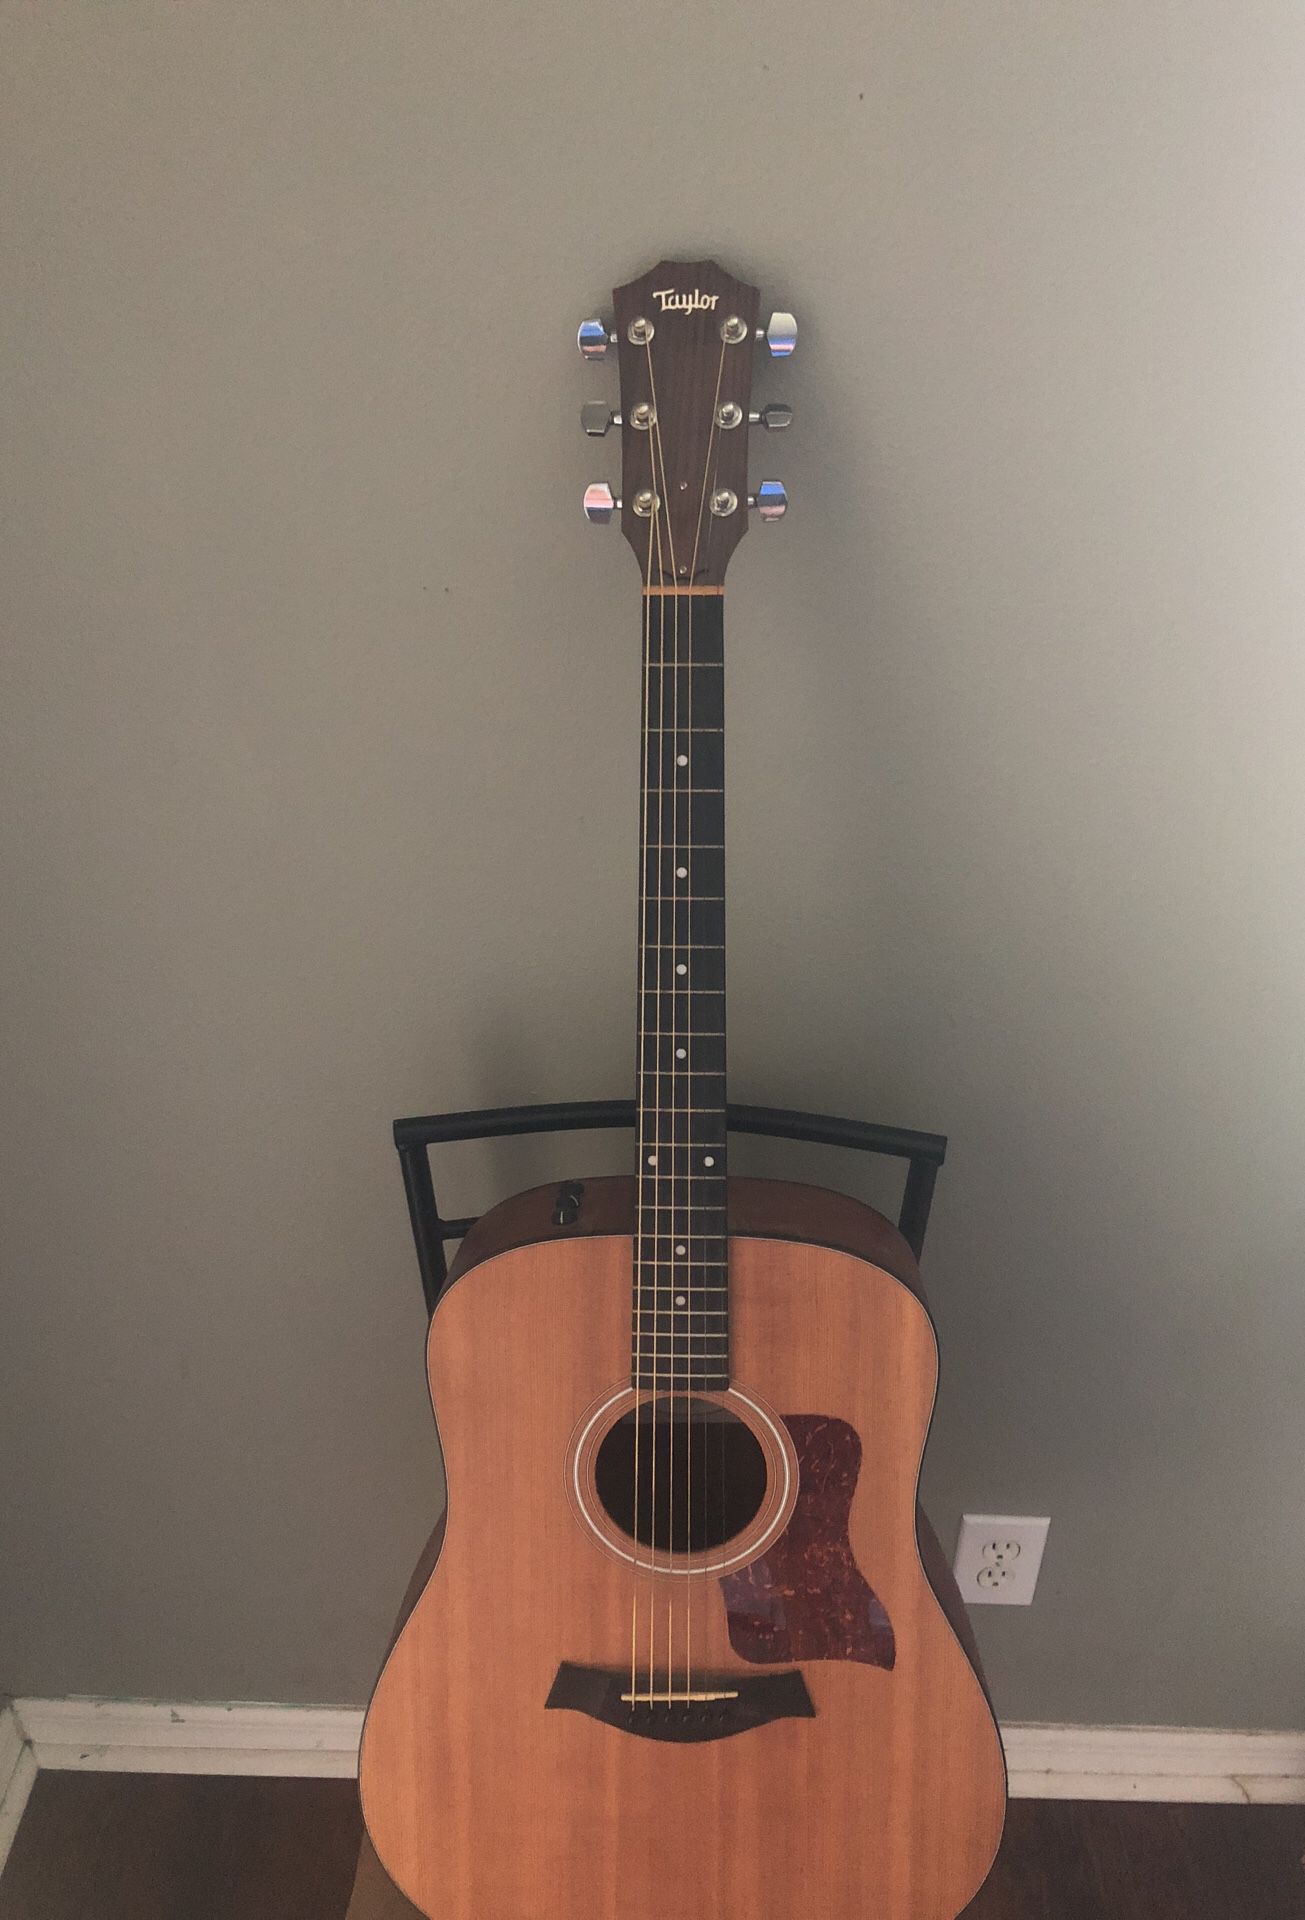 Taylor electric acoustic guitar model 110e, stand, case, cord, and fender amp